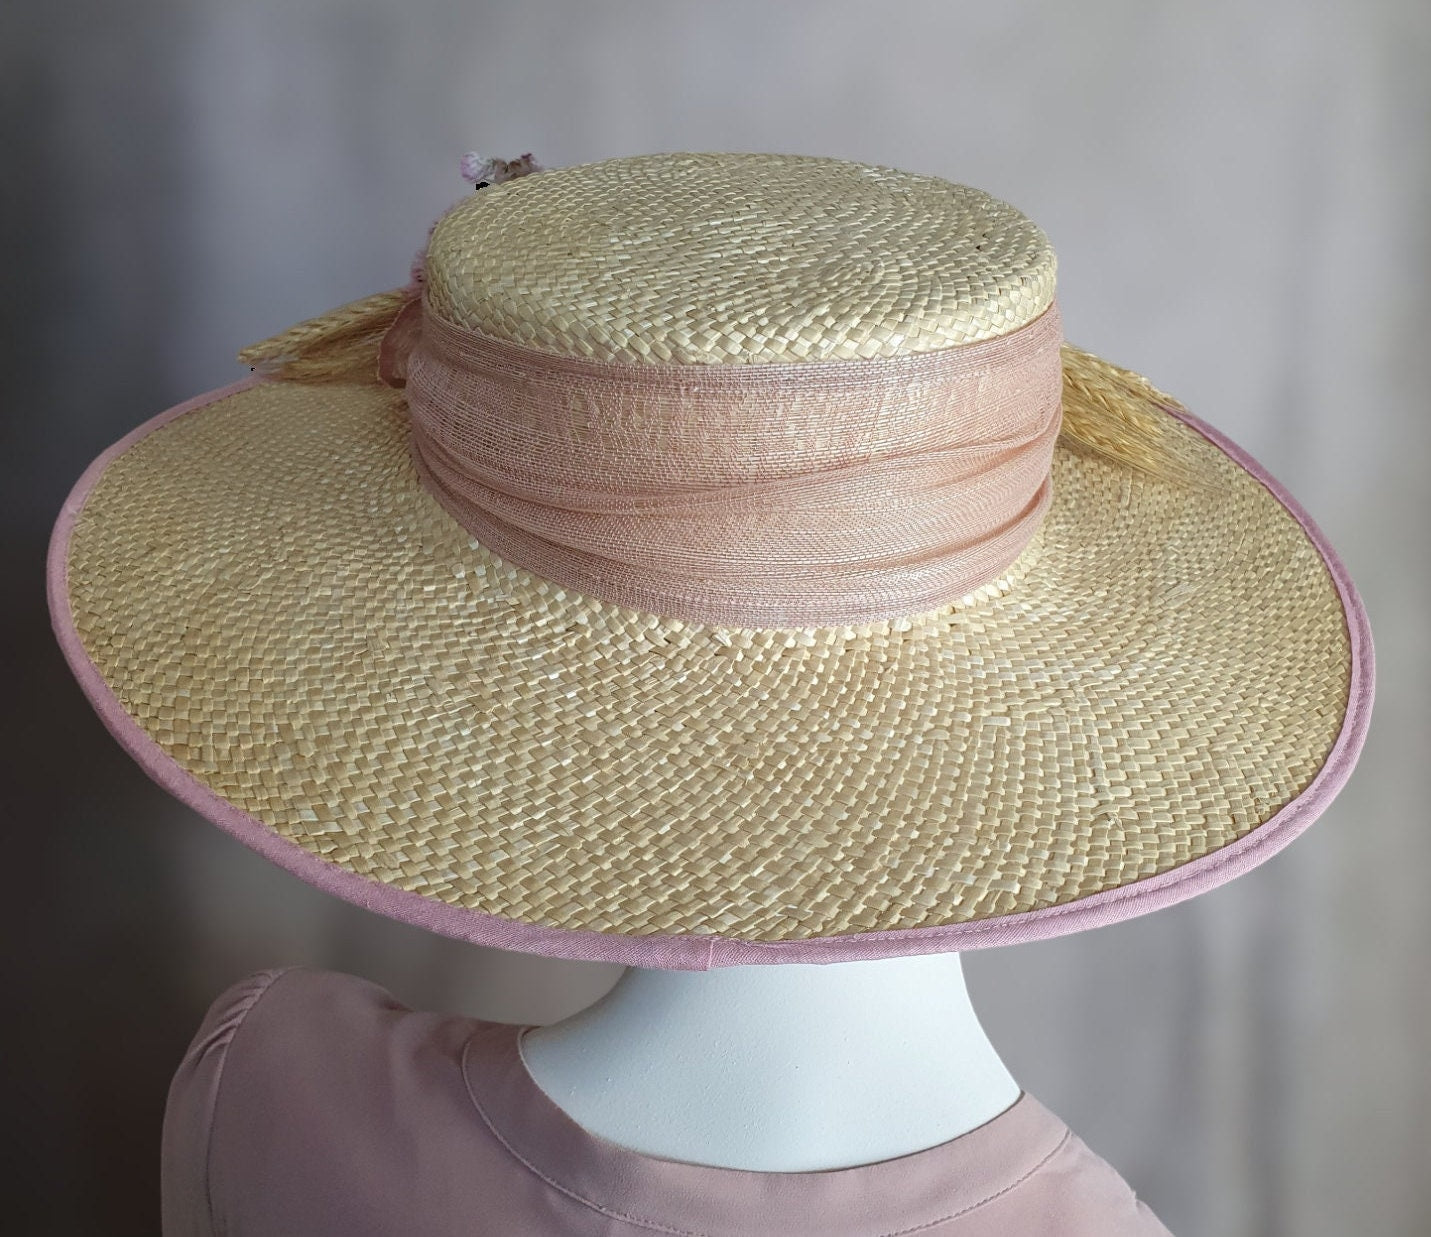 Elegant handmade women's hat with abaca silk and dried flowers, guest hat, straw hat, summer hat, wedding hat, special occasions